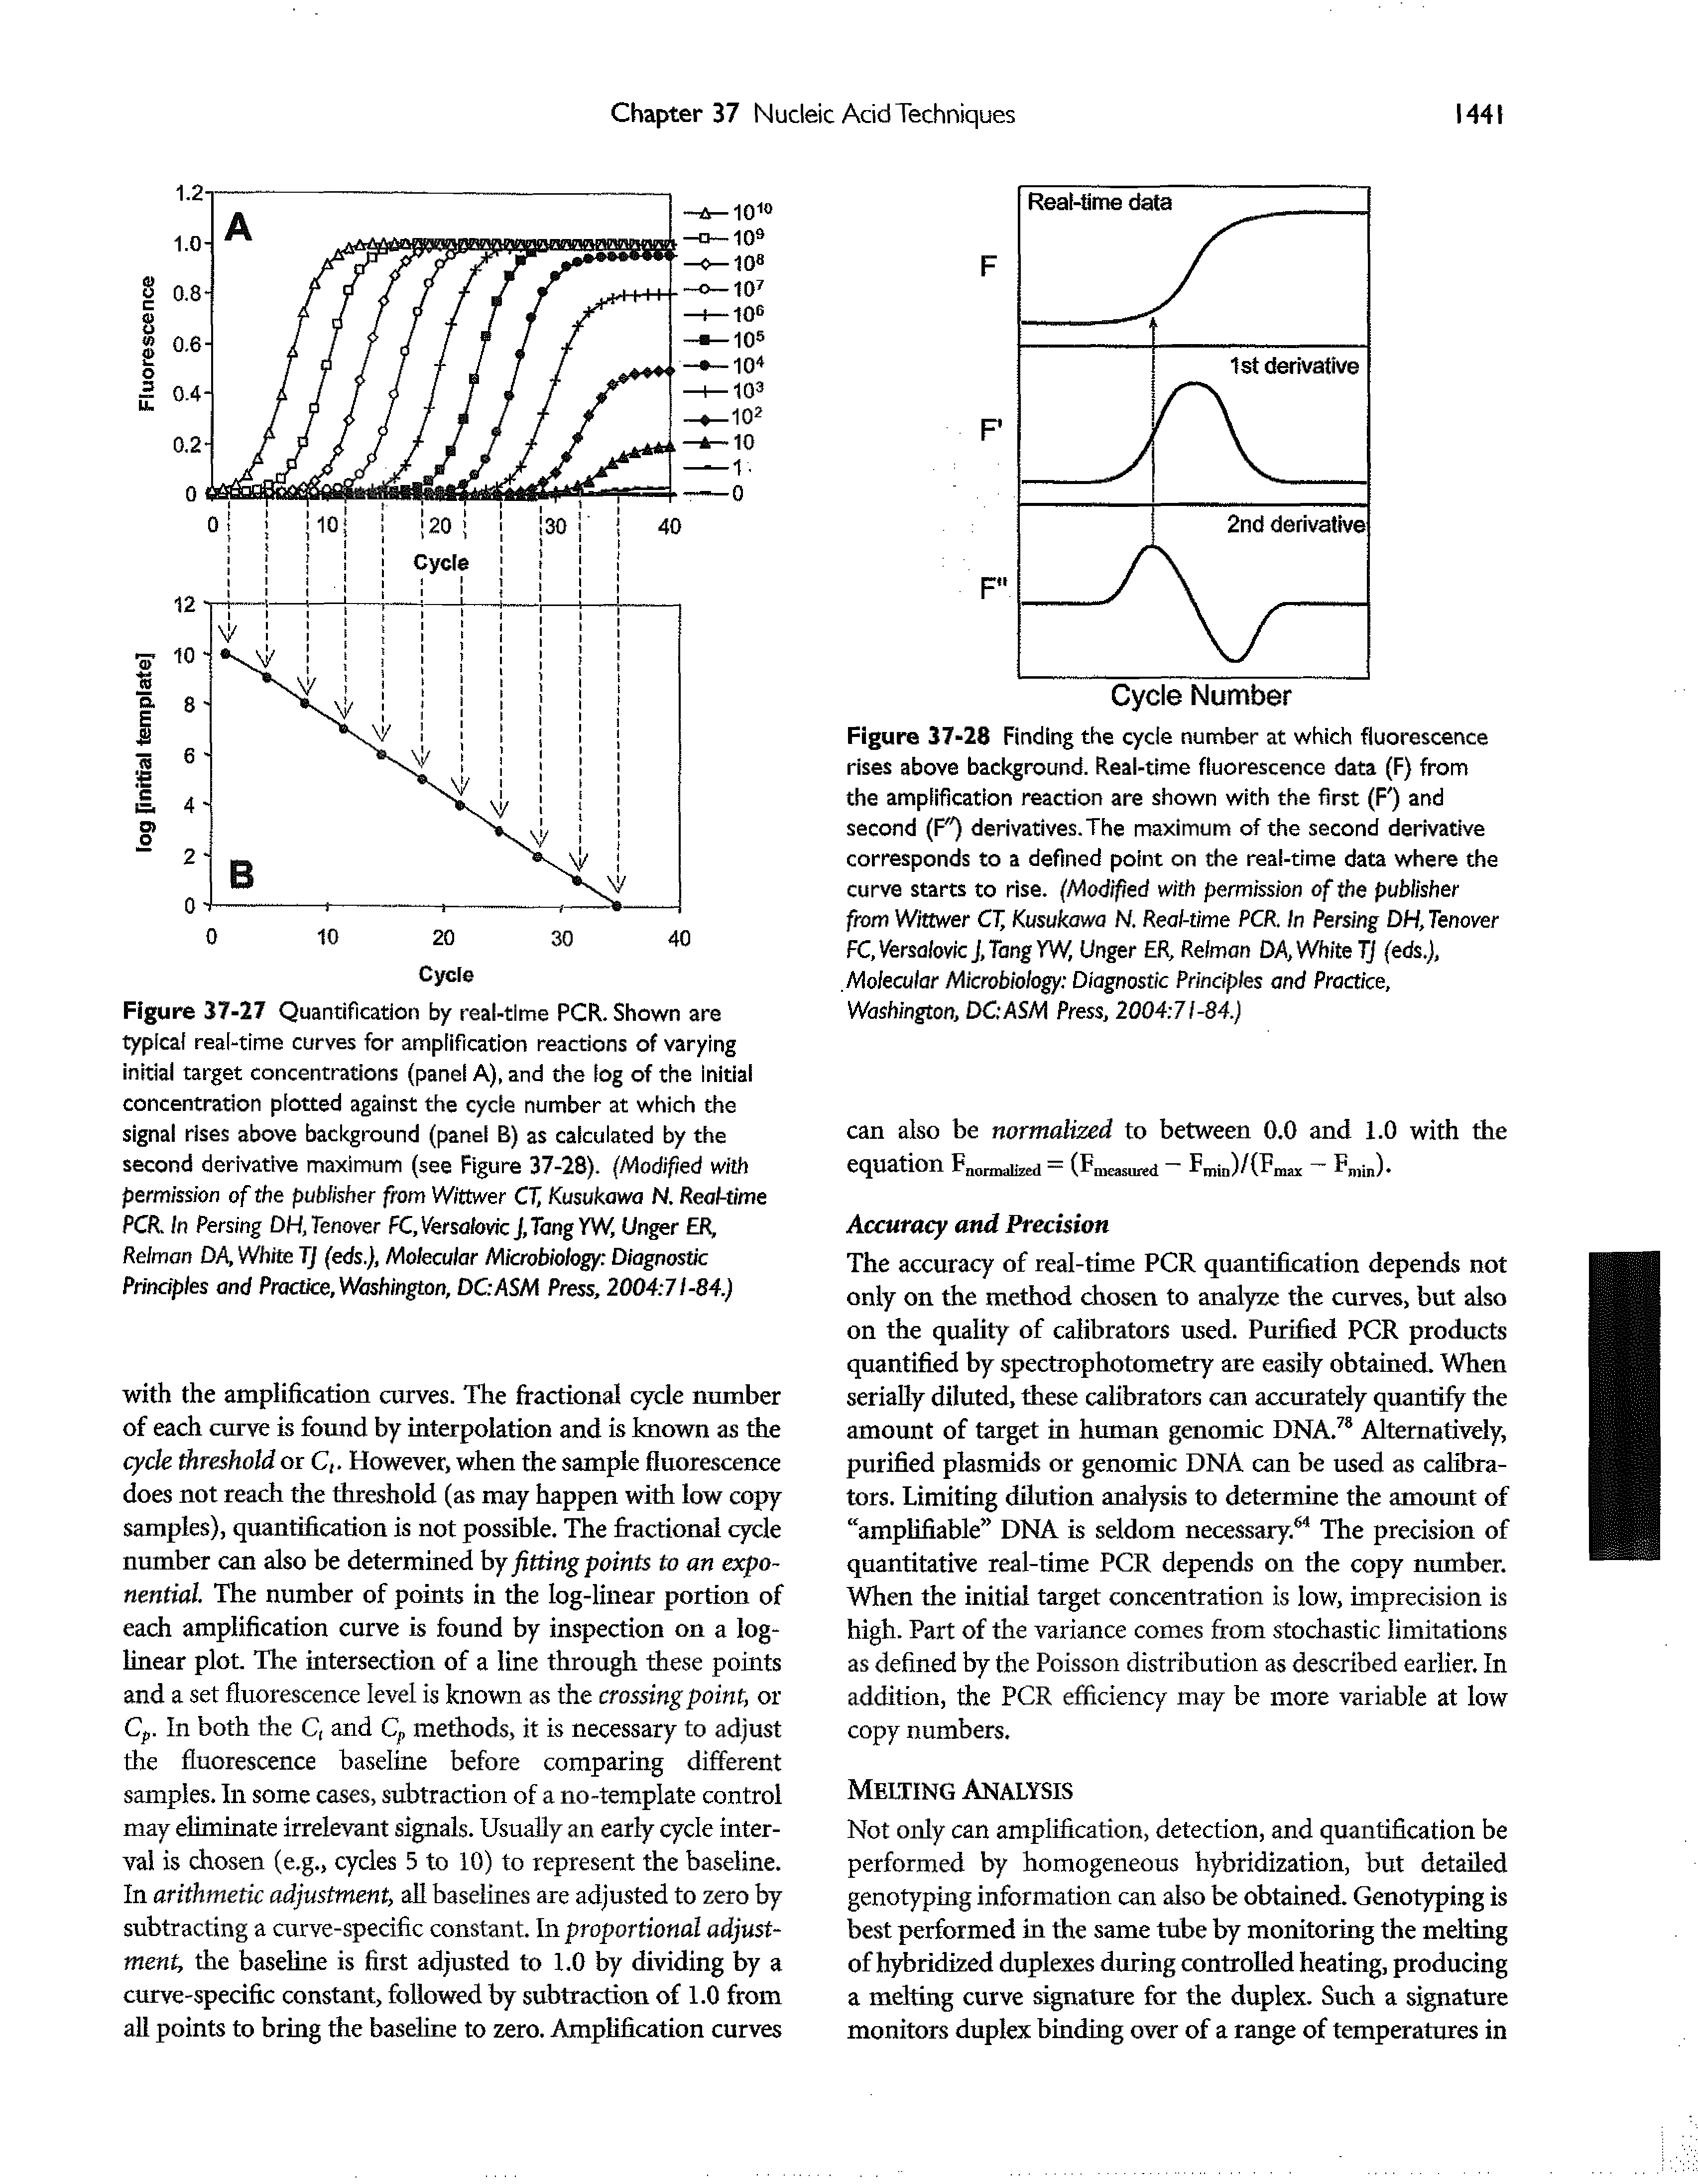 Figure 37-28 Finding the cycle number at which fluorescence rises above background. Real-time fluorescence data (F) from the amplification reaction are shown with the first (F ) and second (F ") derivatives.The maximum of the second derivative corresponds to a defined point on the real-time data where the curve starts to rise. (Modified with permission of the pubiisber from Wittwer CT, Kusukawa N. Real-time PCR. In Persing DH, Tenover FC,Versalovic J,TangYW, Unger ER, Reiman DA, White TJ (eds.), Molecular Microbiology Diagnostic Principles and Practice, Washington, DC ASM Press, 2004 71-84.)...